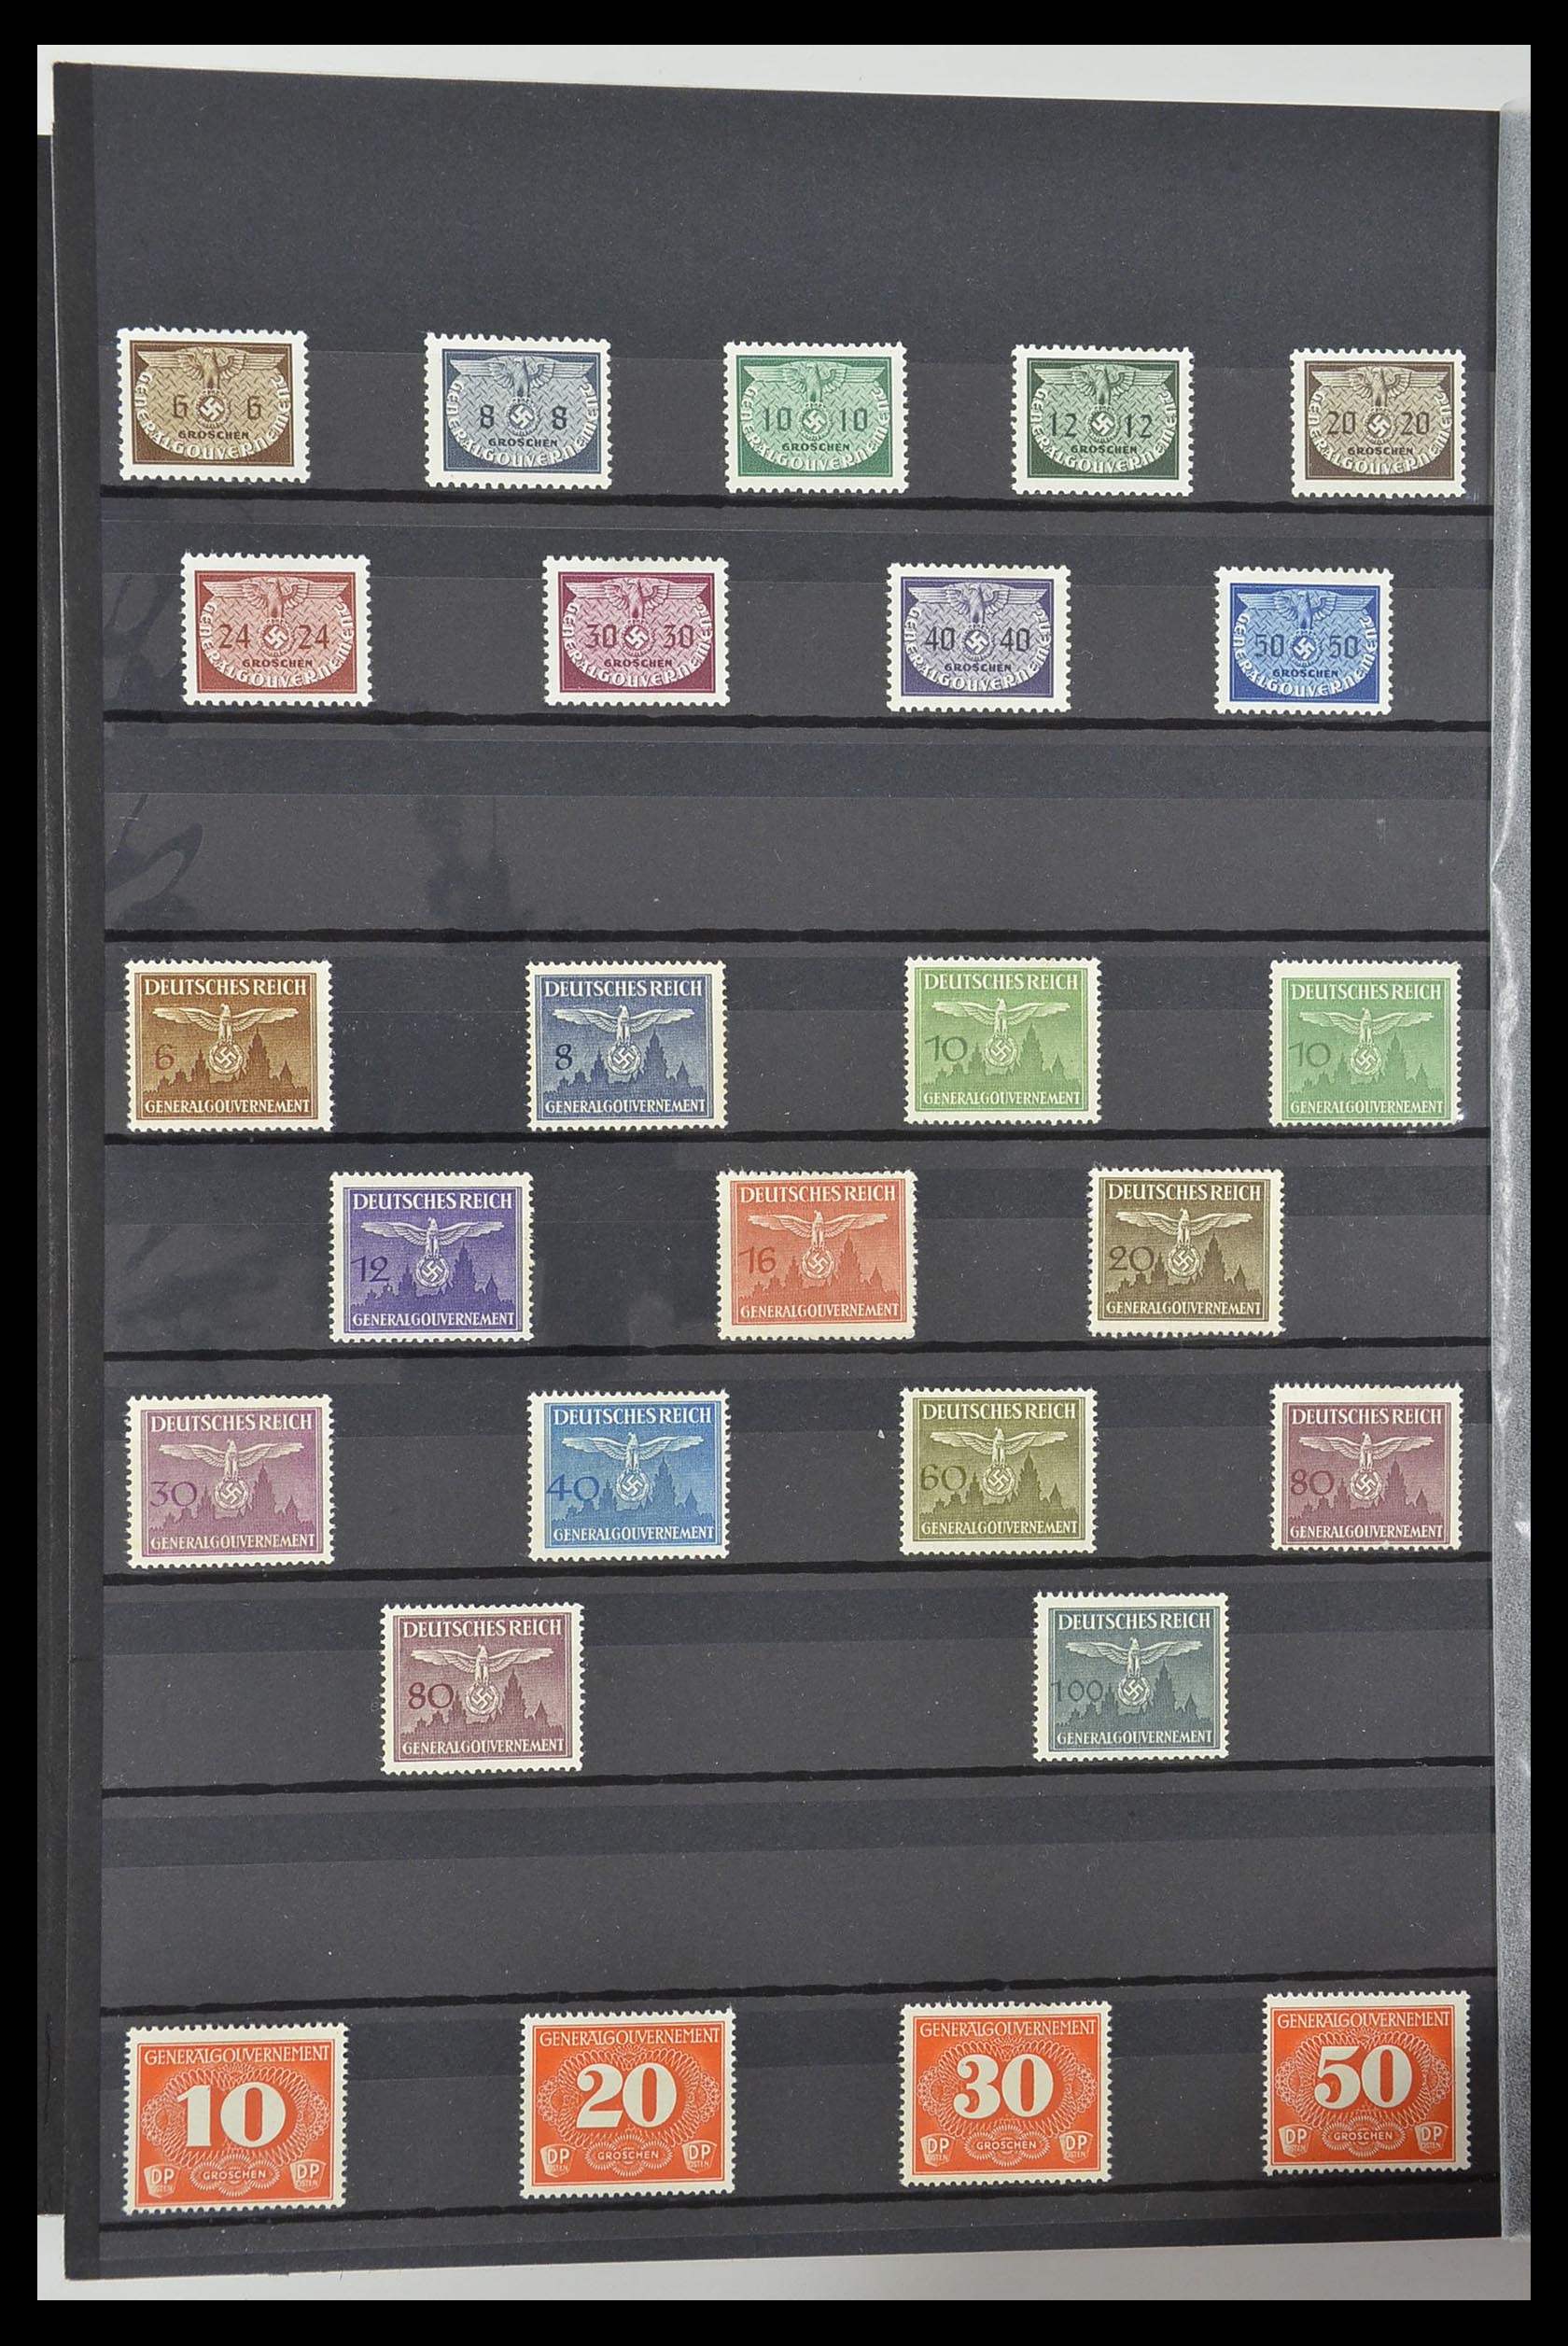 33553 025 - Stamp collection 33553 German territories and occupations 1939-1948.